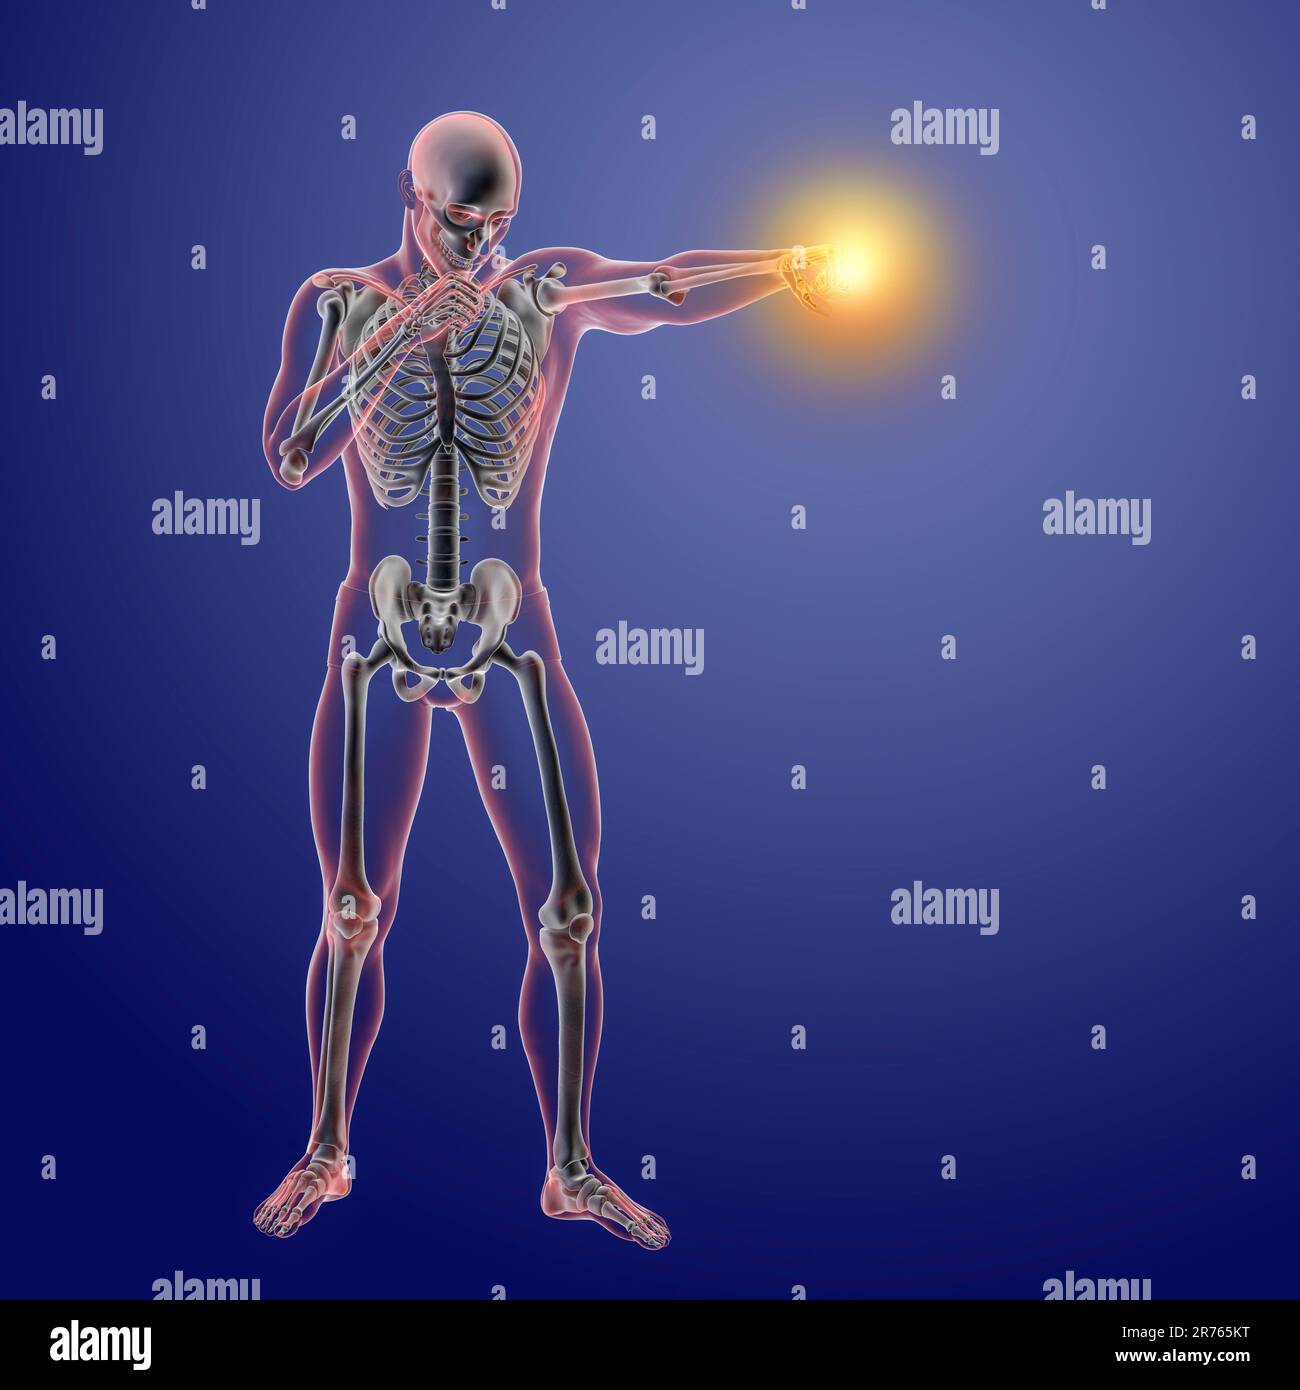 Anatomy of a boxer, computer illustration. Human male body in boxing ...